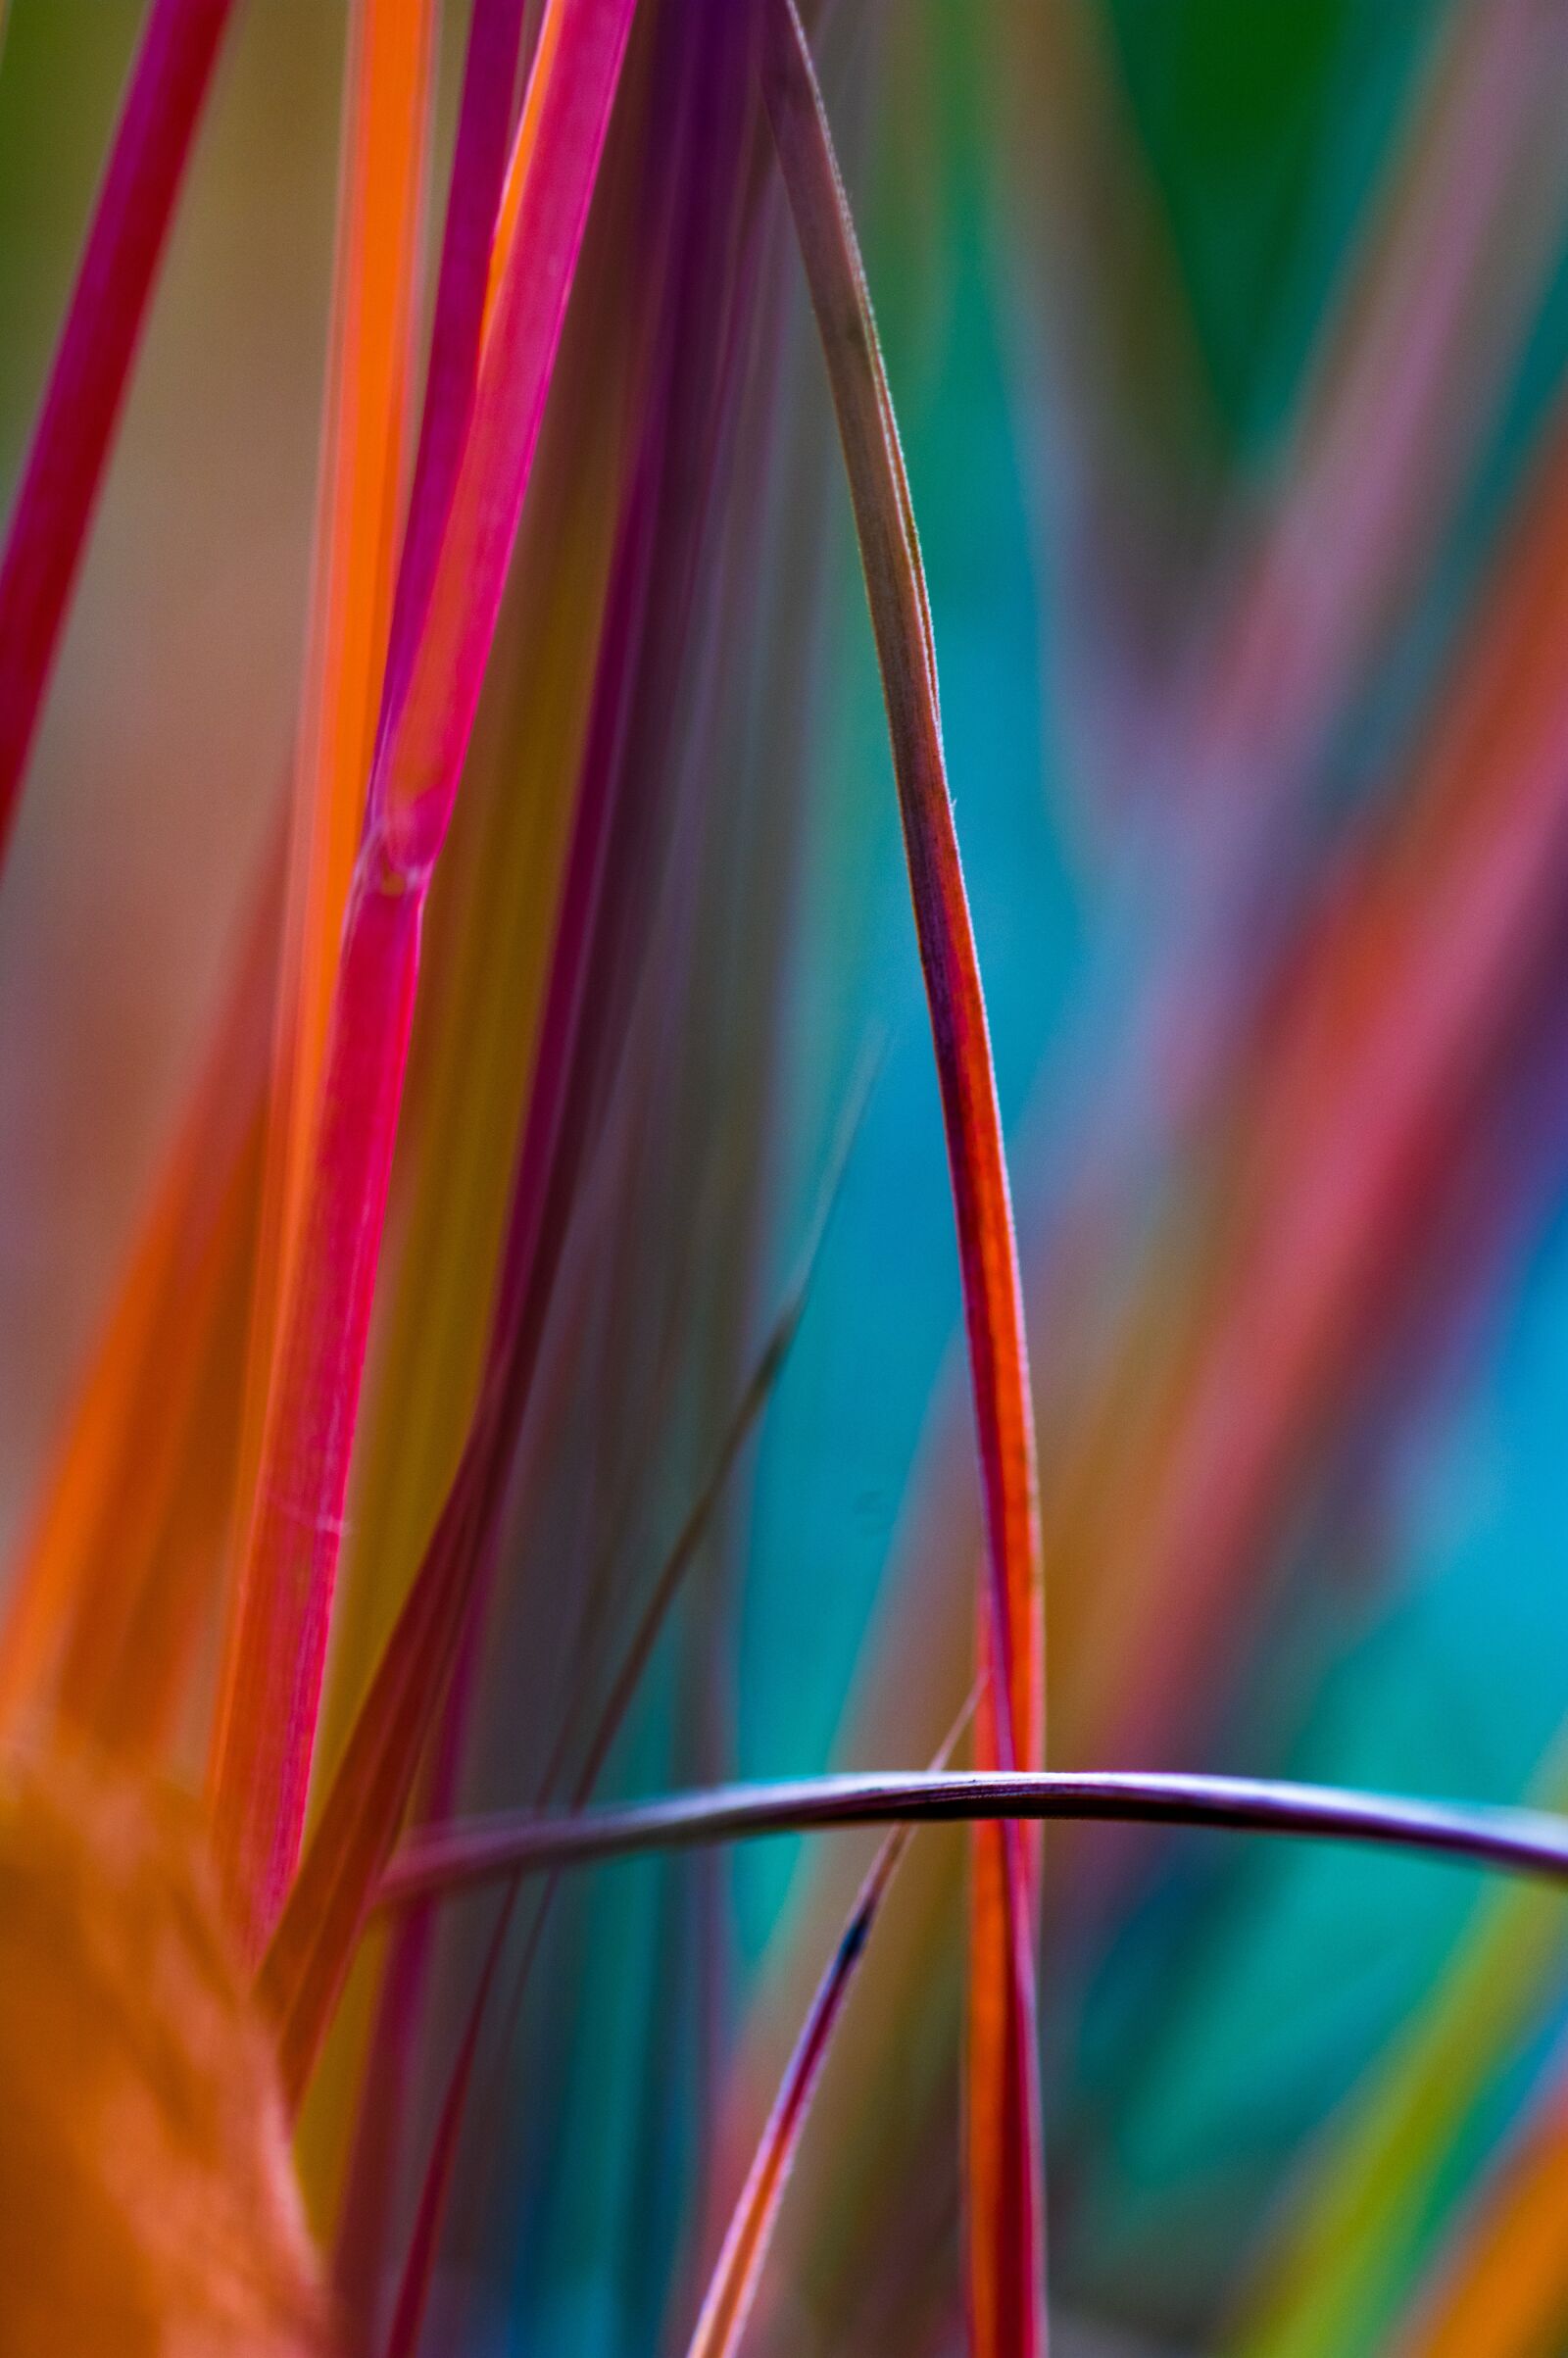 Pentax KP + Sigma sample photo. Grass, abstract, detail photography